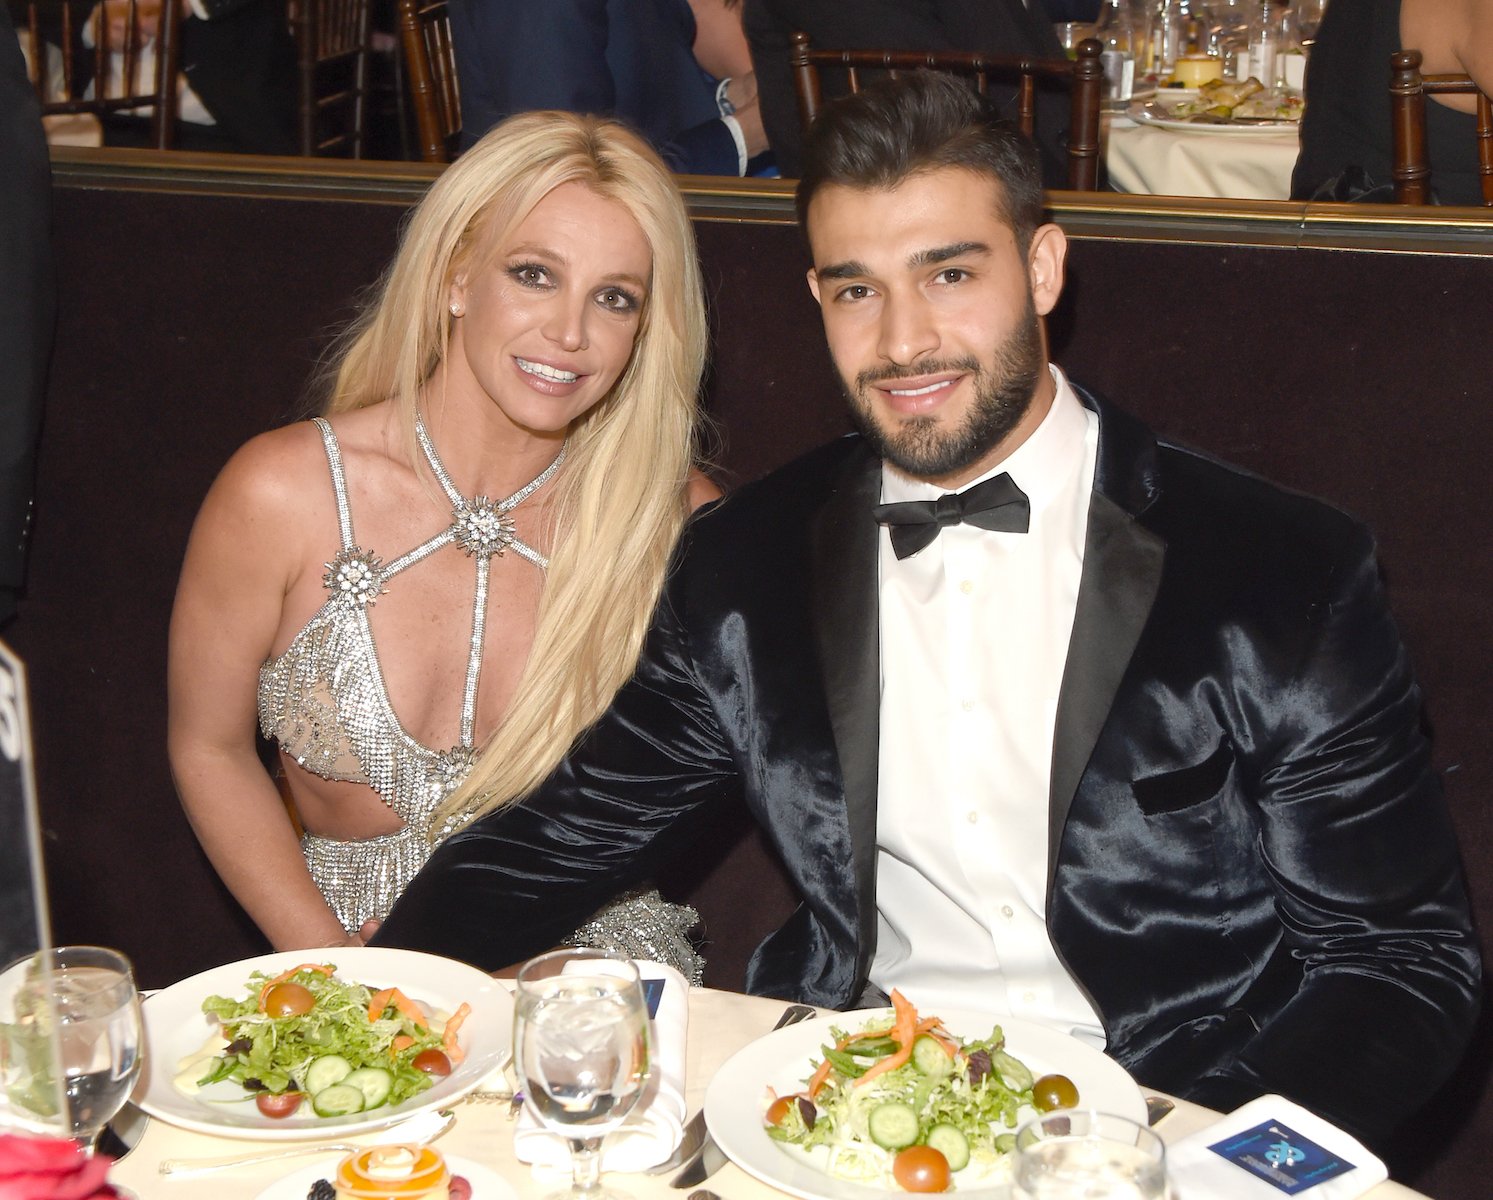 Britney Spears and Sam Asghari sitting at a table and smiling at an event